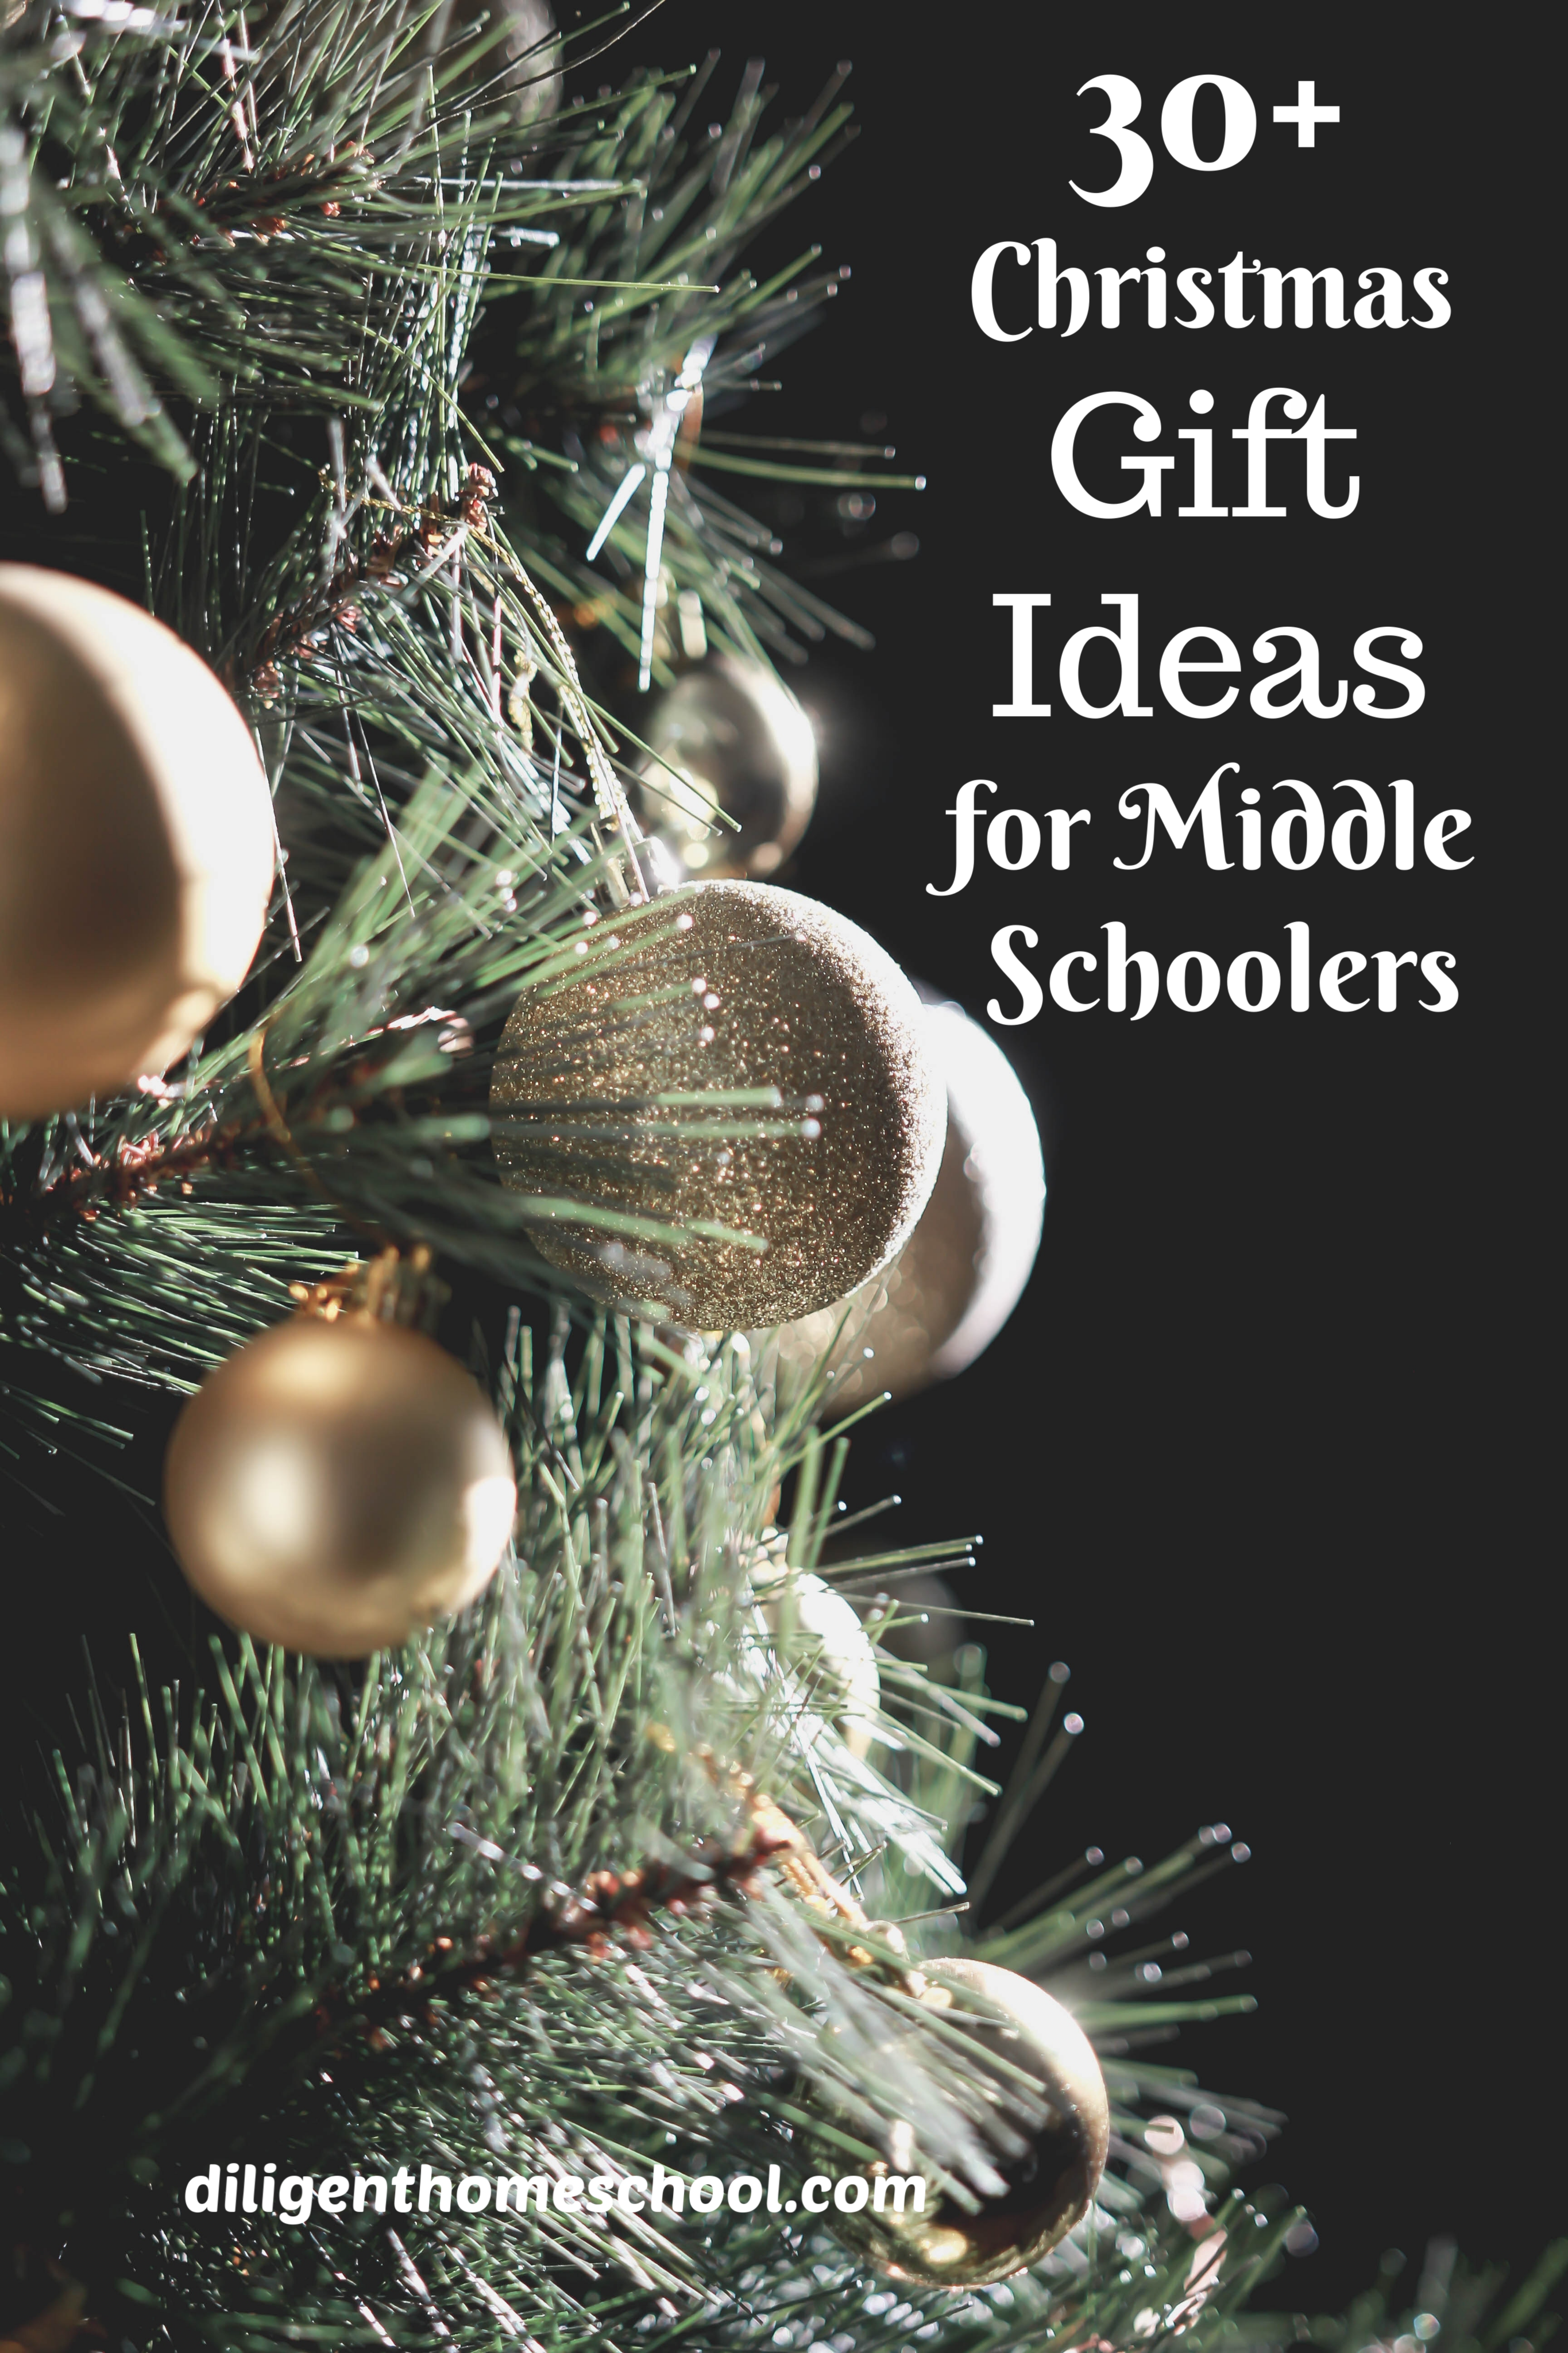 Looking for gift ideas? This list of 30+ Christmas Gift Ideas for Middle Schoolers strikes a balance that will hopefully be just right for your younger teens!